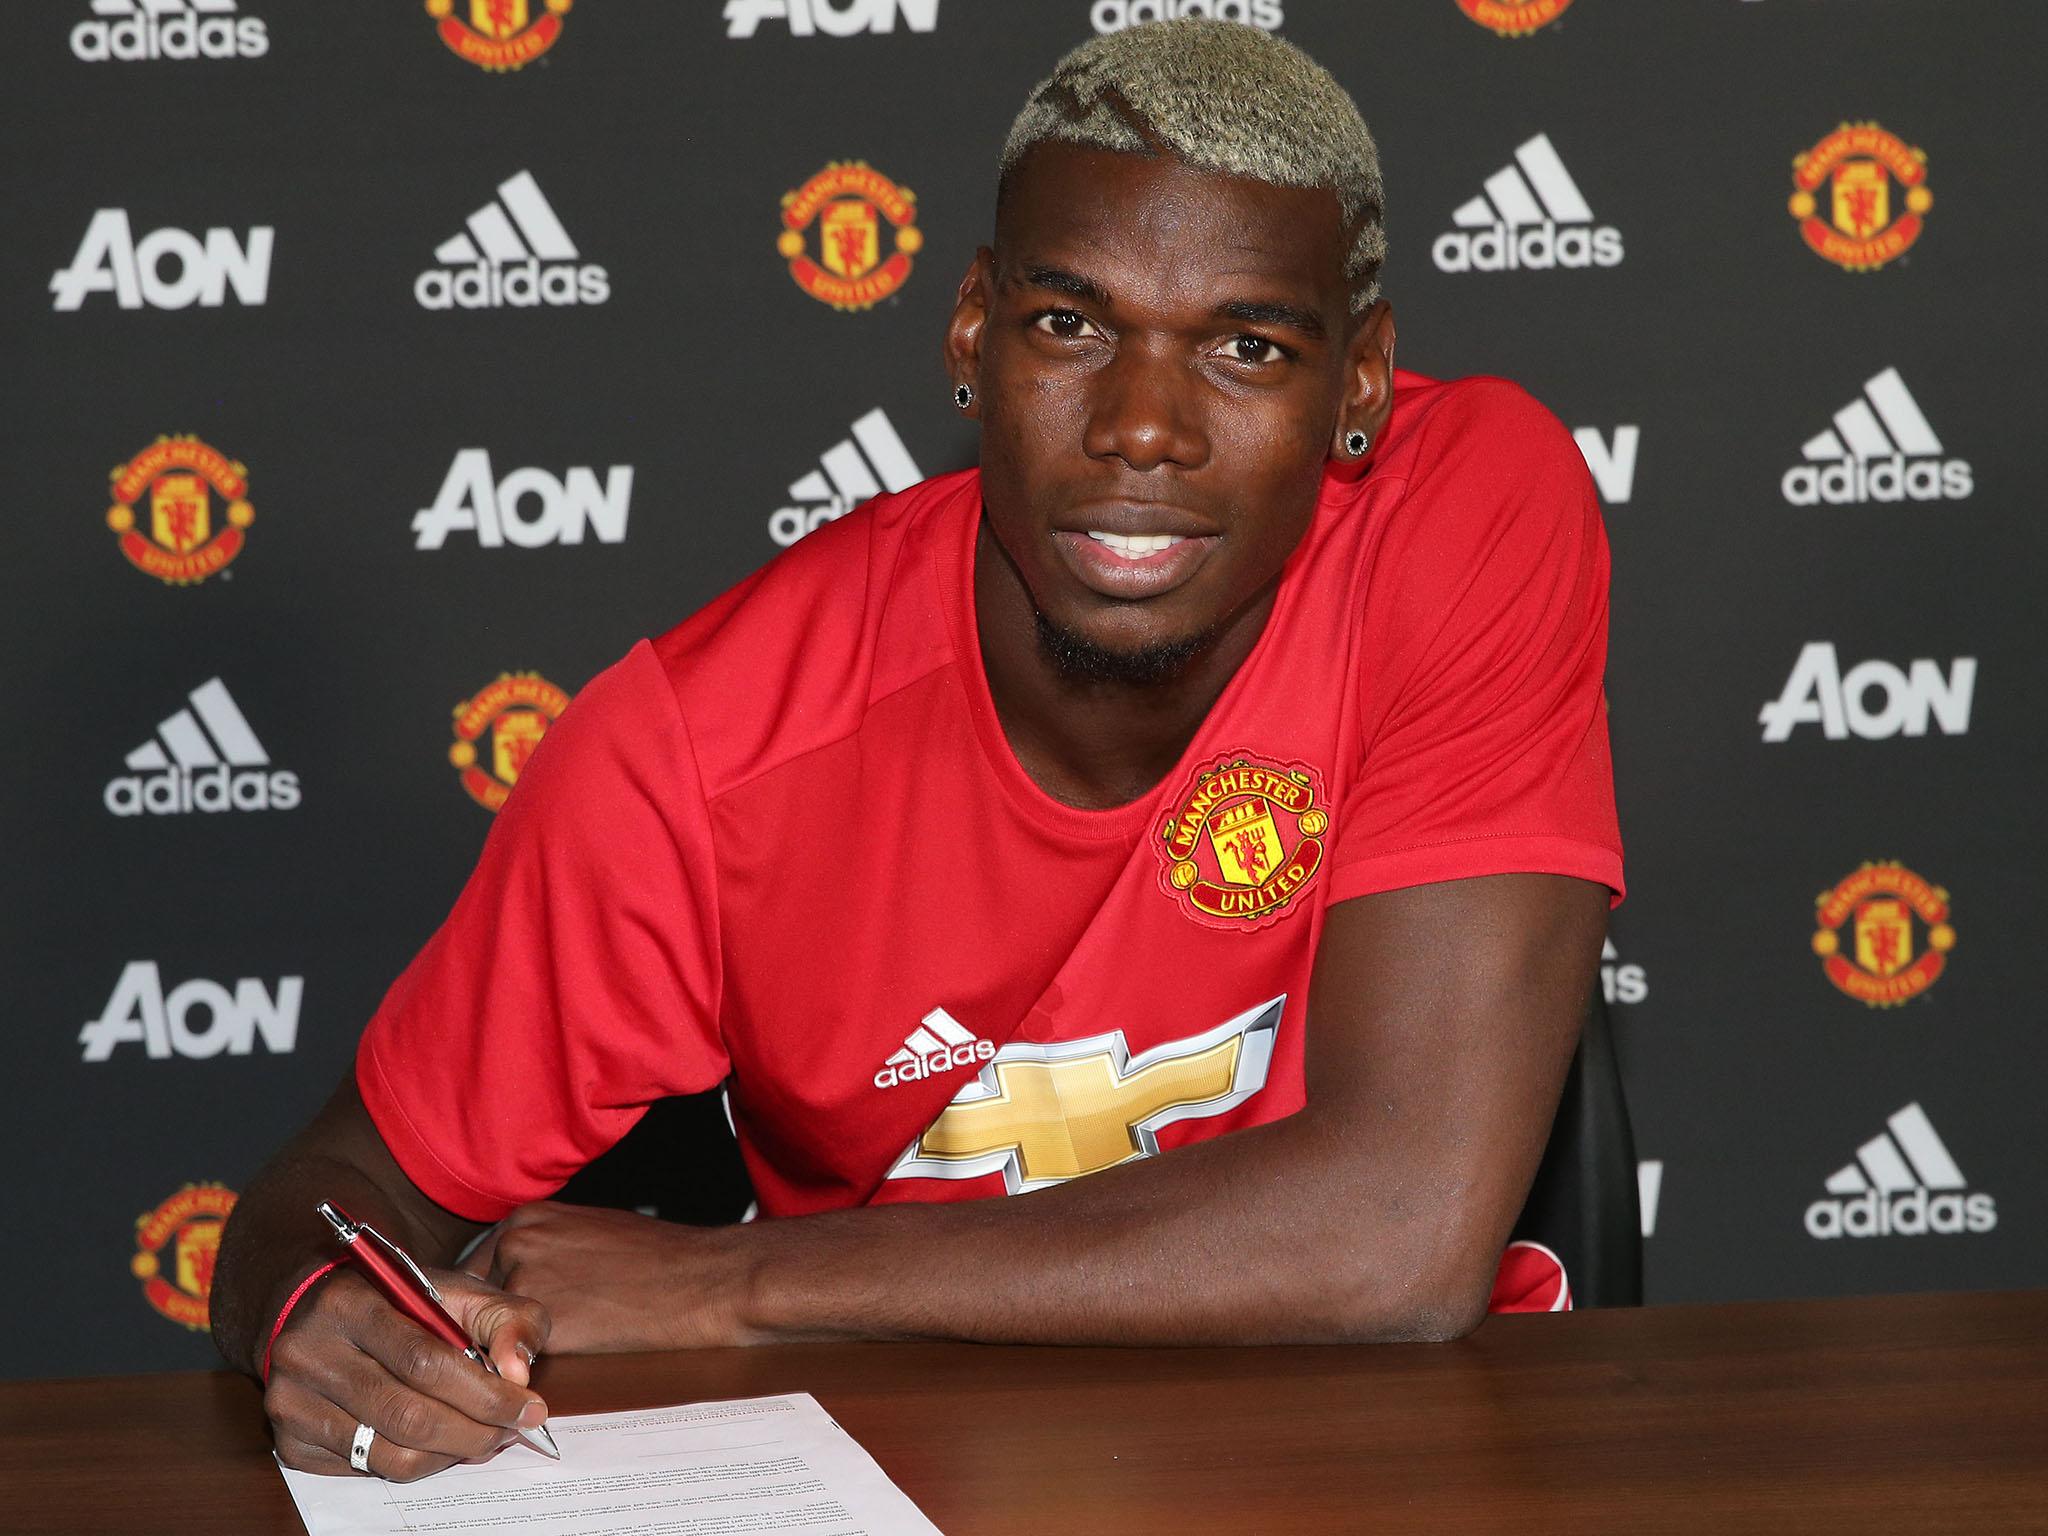 Paul Pogba was the subject of the world's most expensive transfer fee last summer